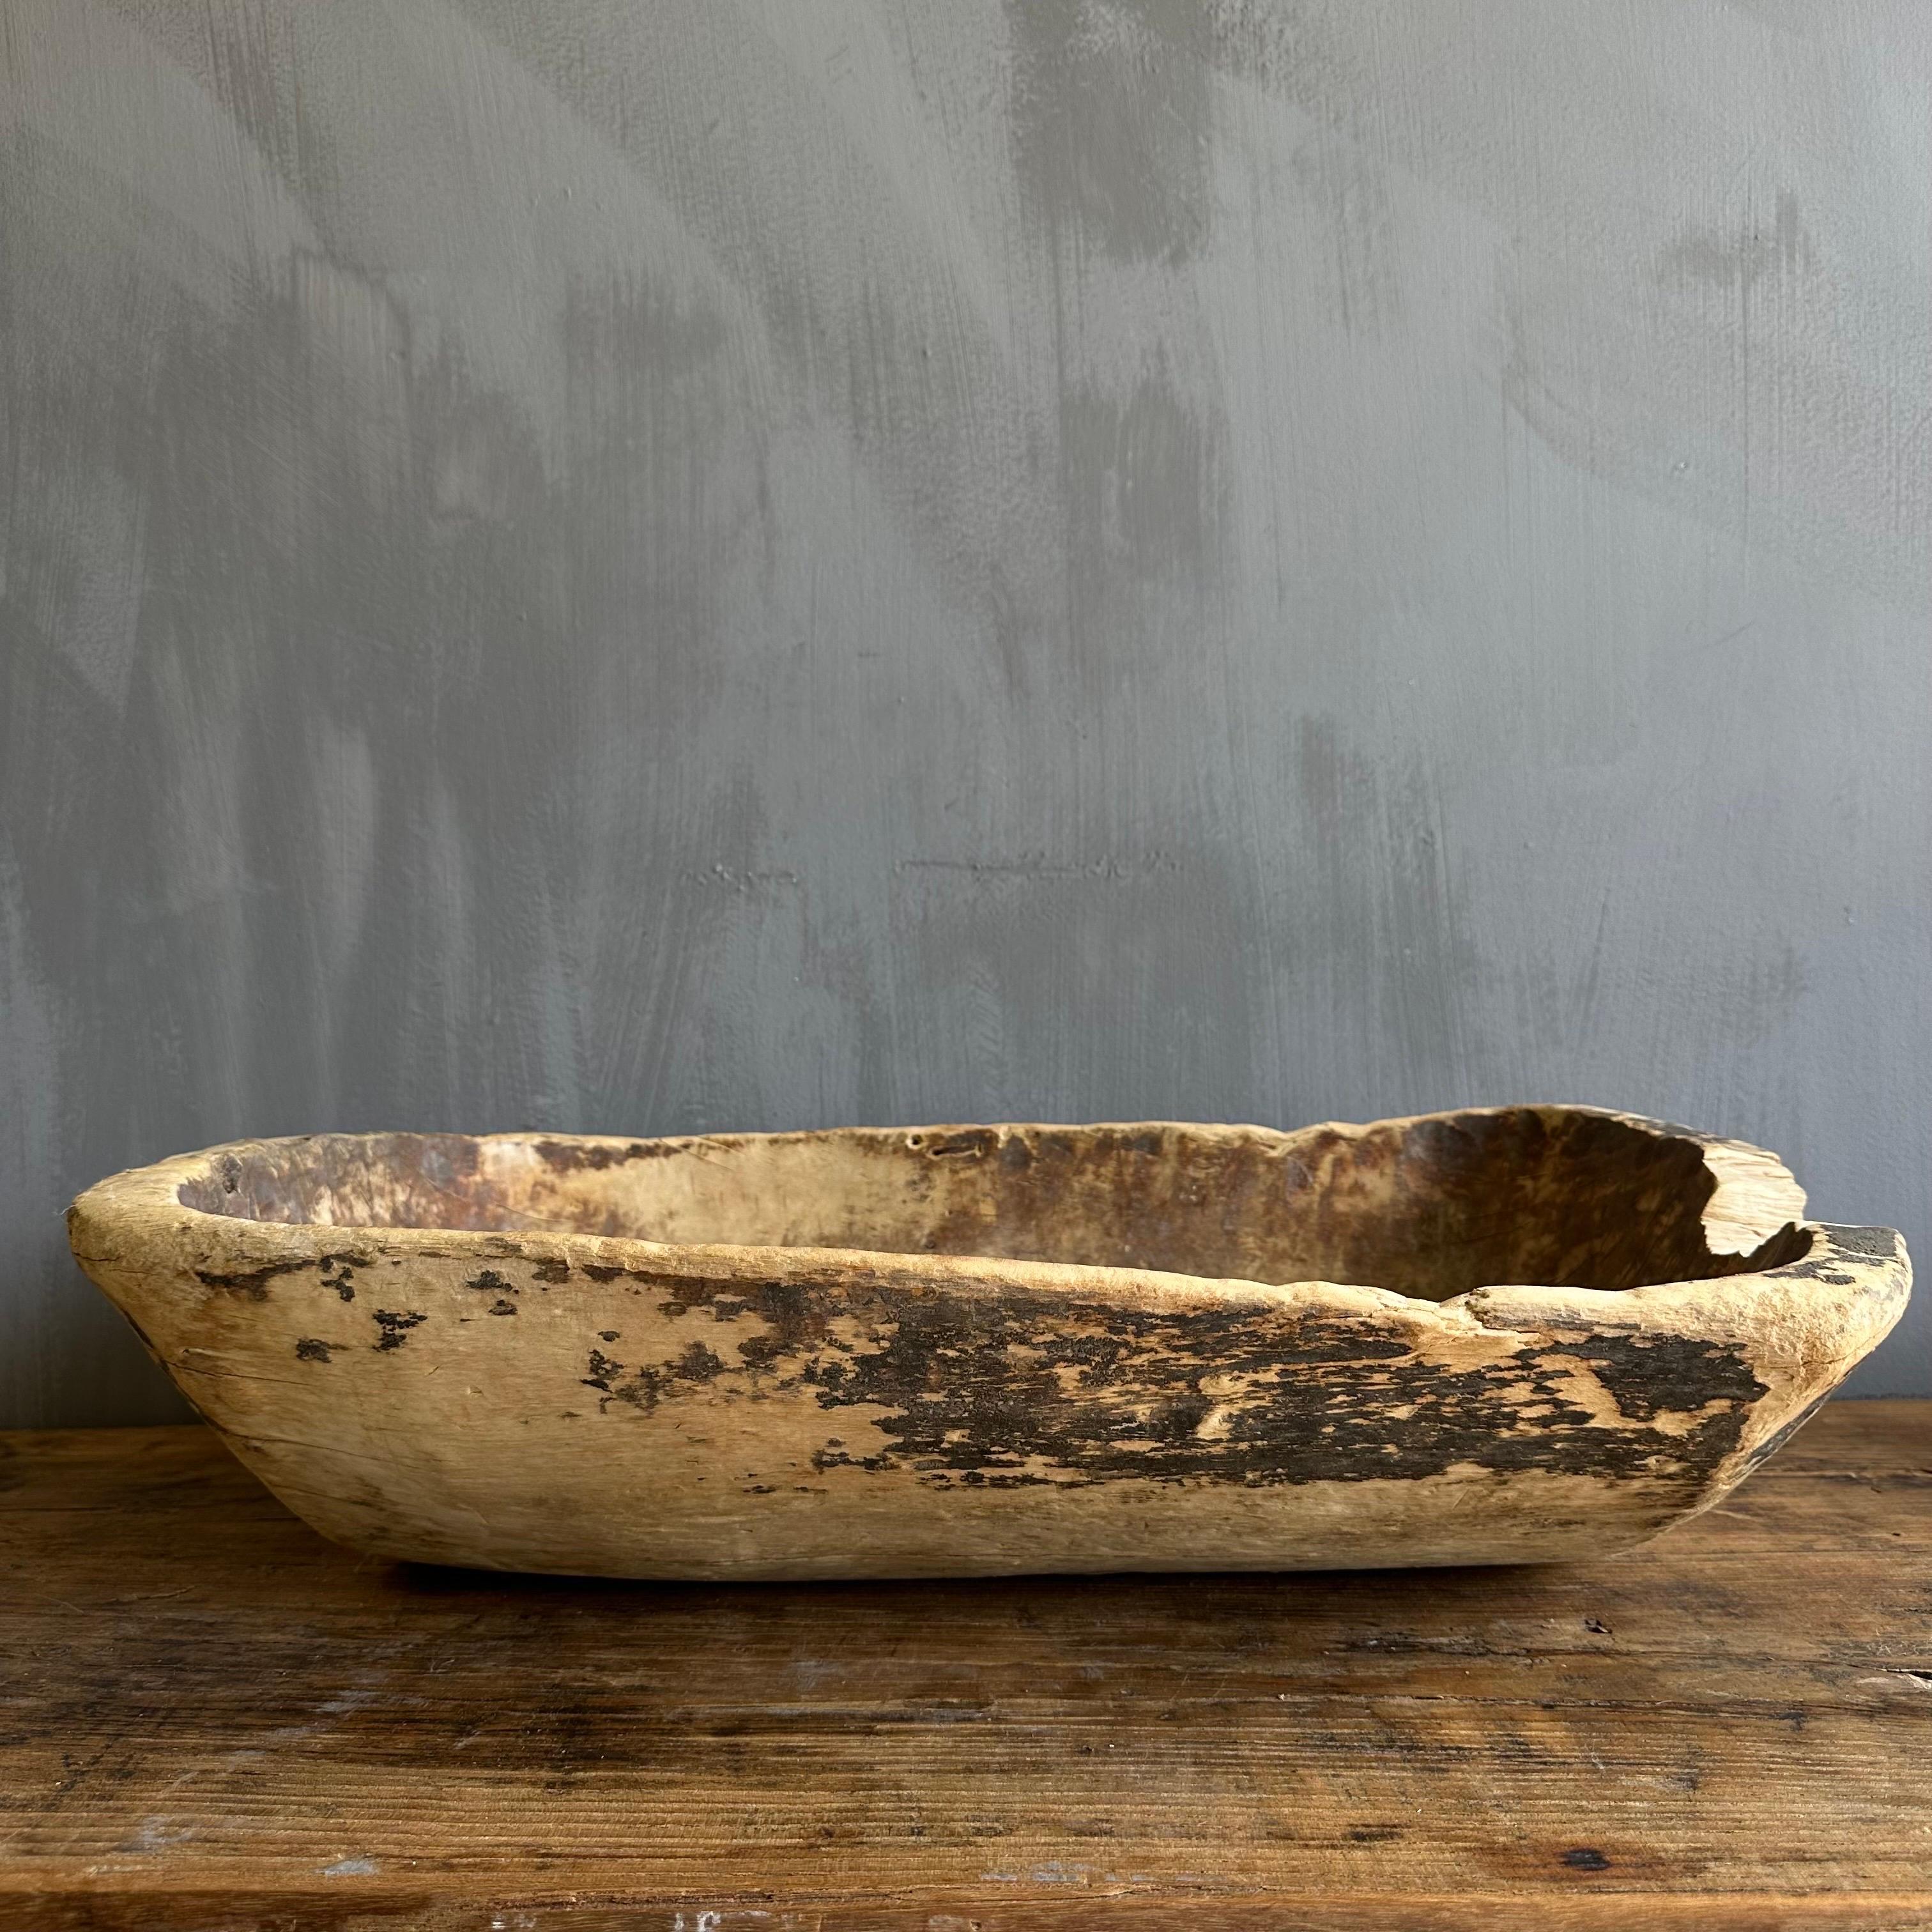 Vintage wood trough decorative bowl
 Beautiful wood trough with natural patina. Can be used on a dining table or server for decoration.
Wood is natural with patina. Some troughs will have decorative metal on or around the bowl, please view the